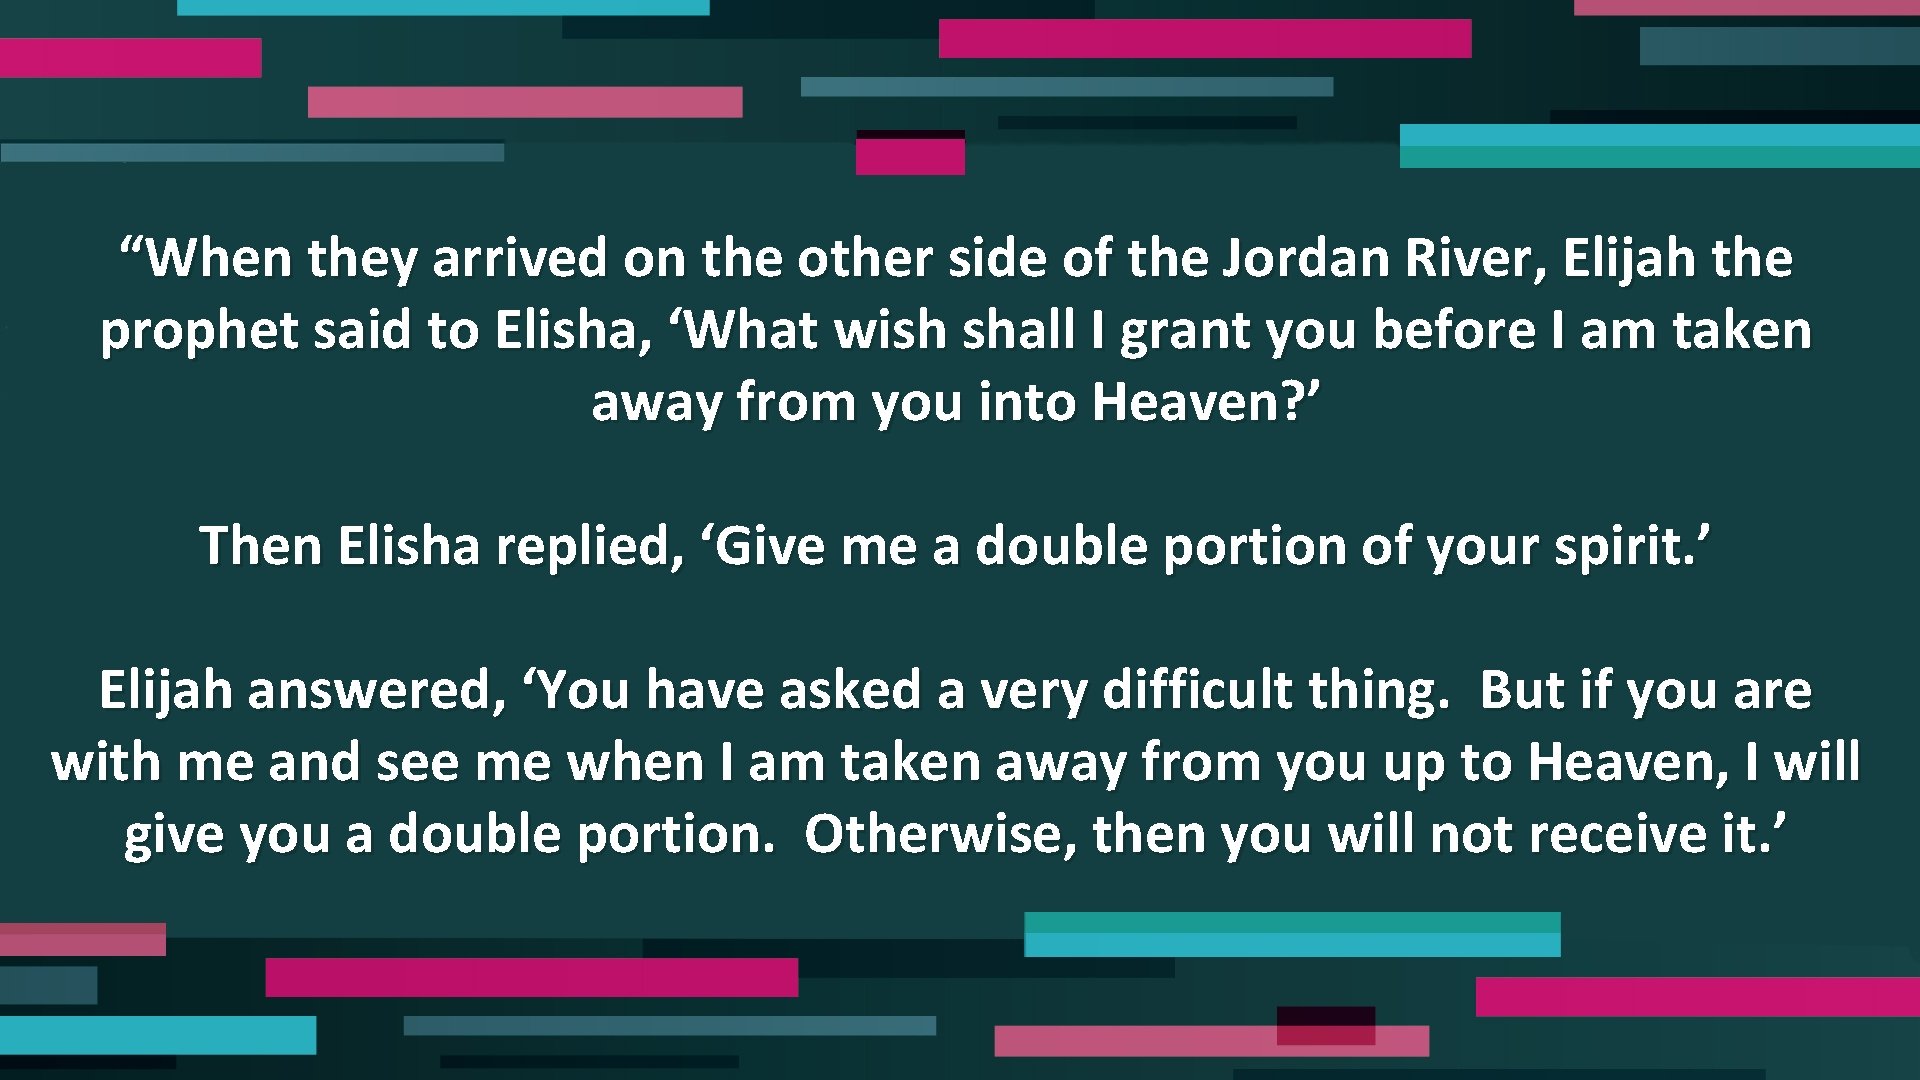 “When they arrived on the other side of the Jordan River, Elijah the prophet